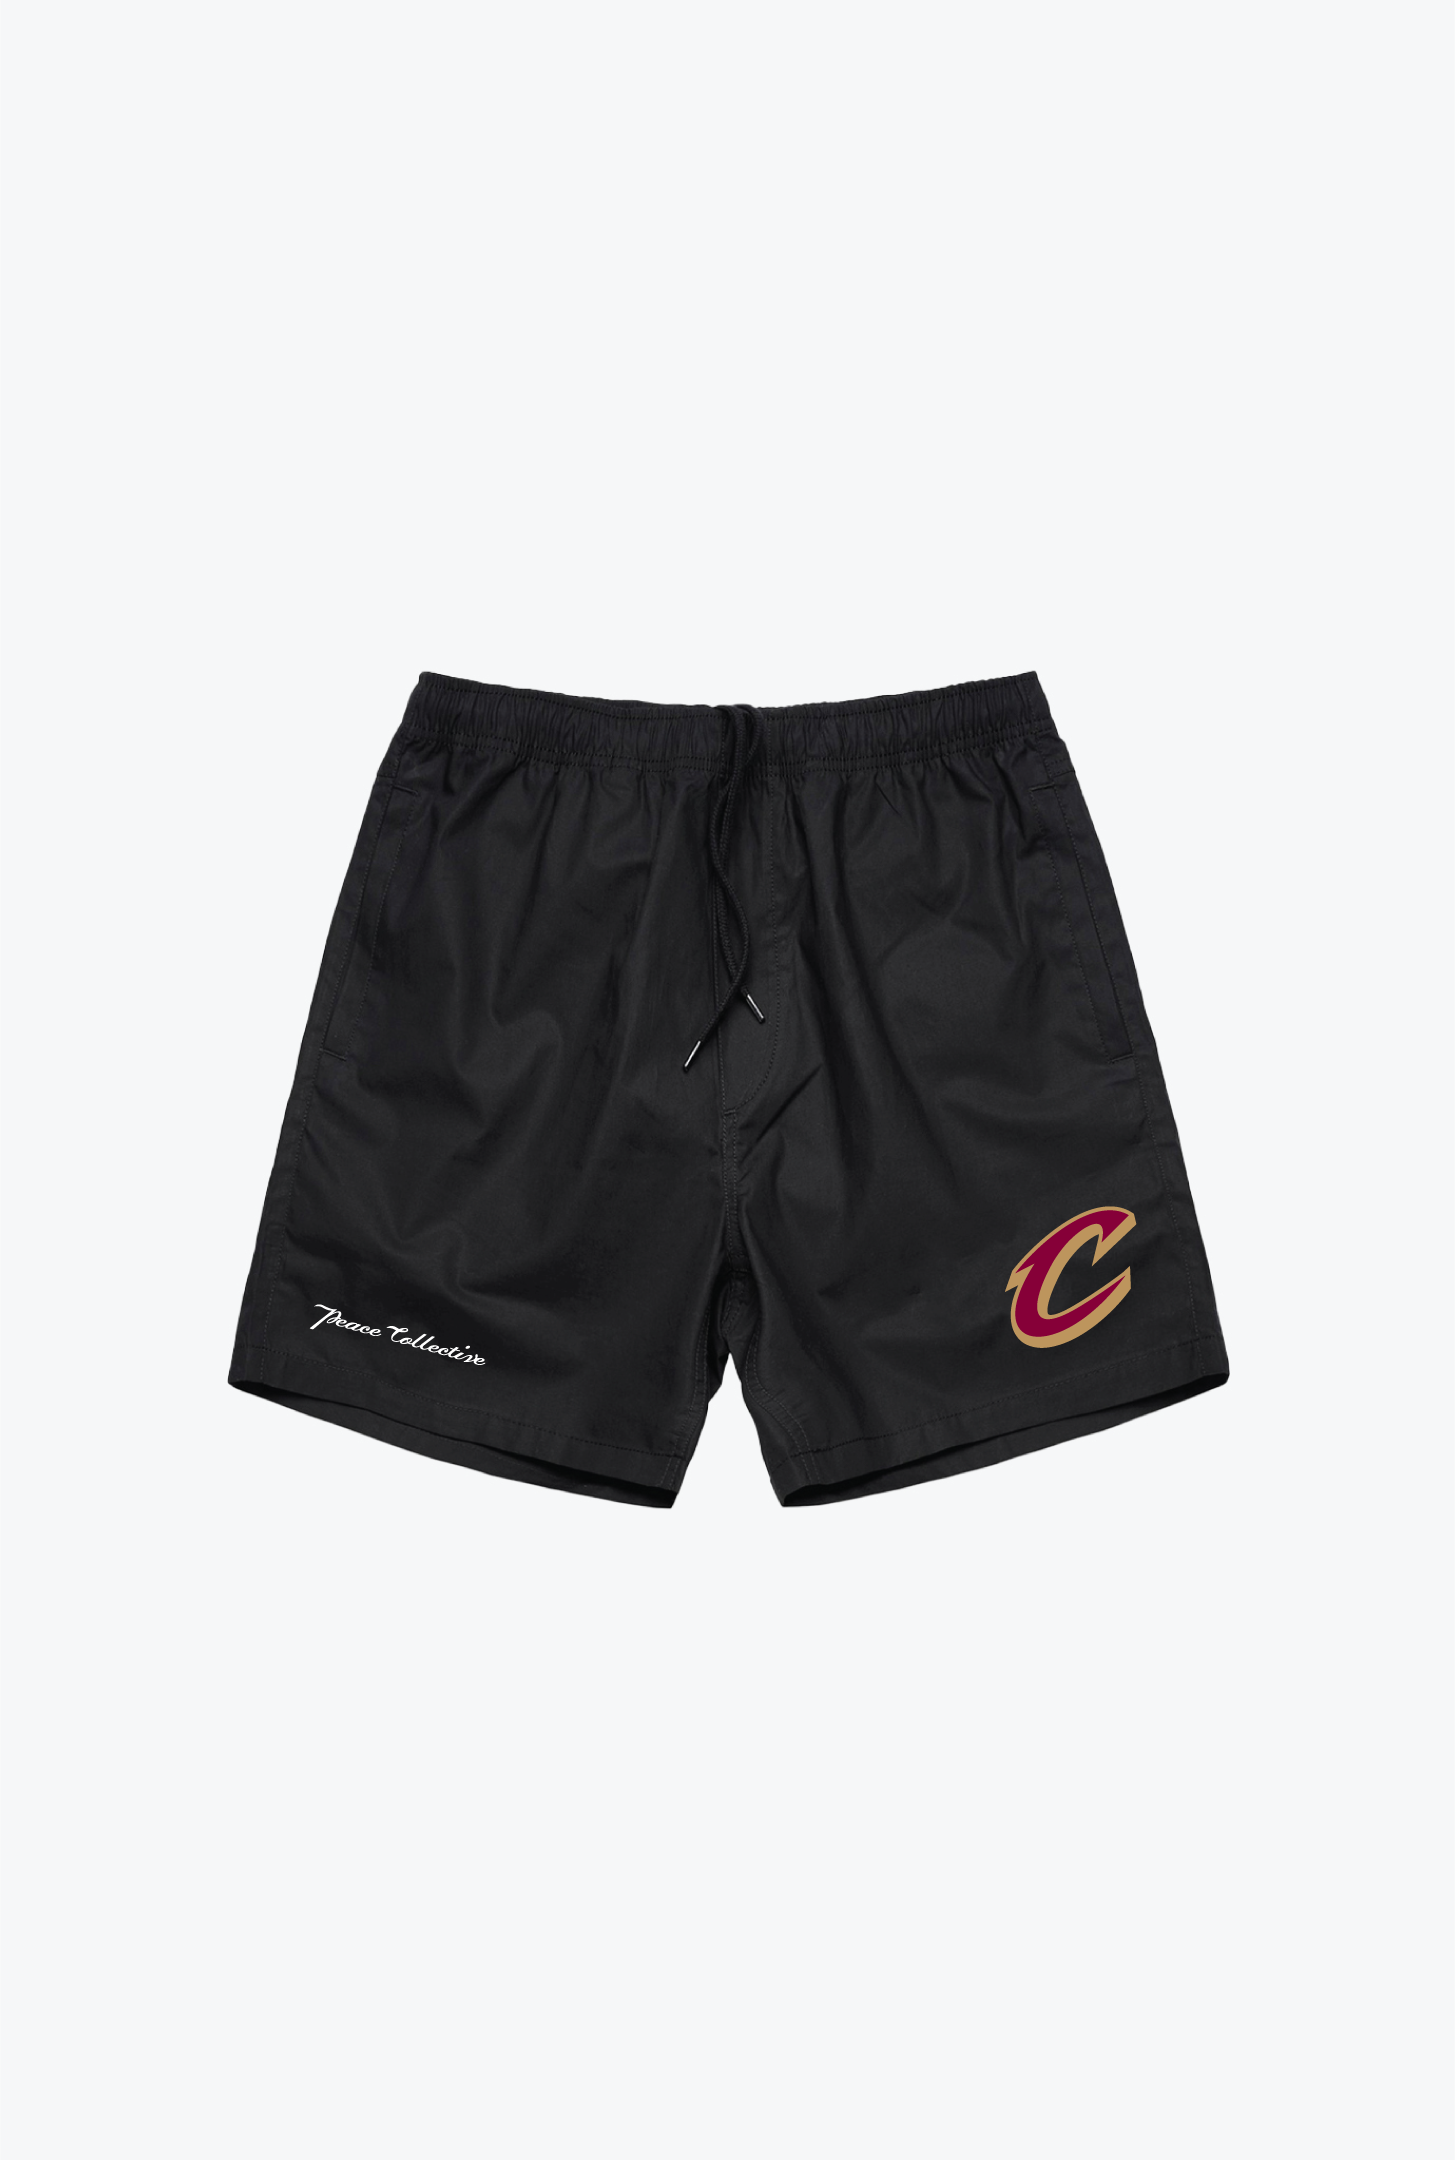 Cleveland Cavaliers Board Shorts - Black